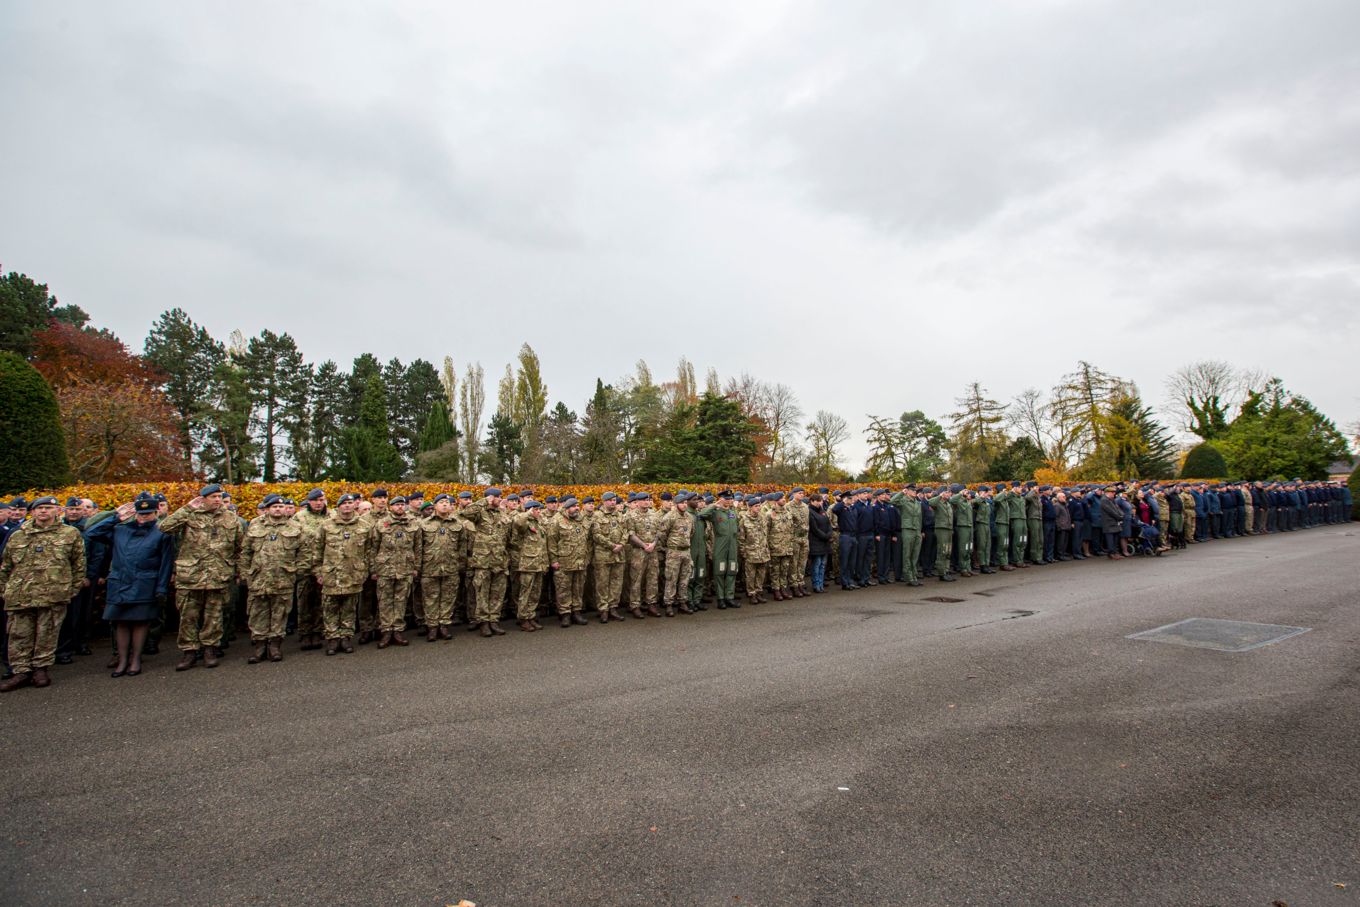 The Act of Remembrance at RAF Wittering